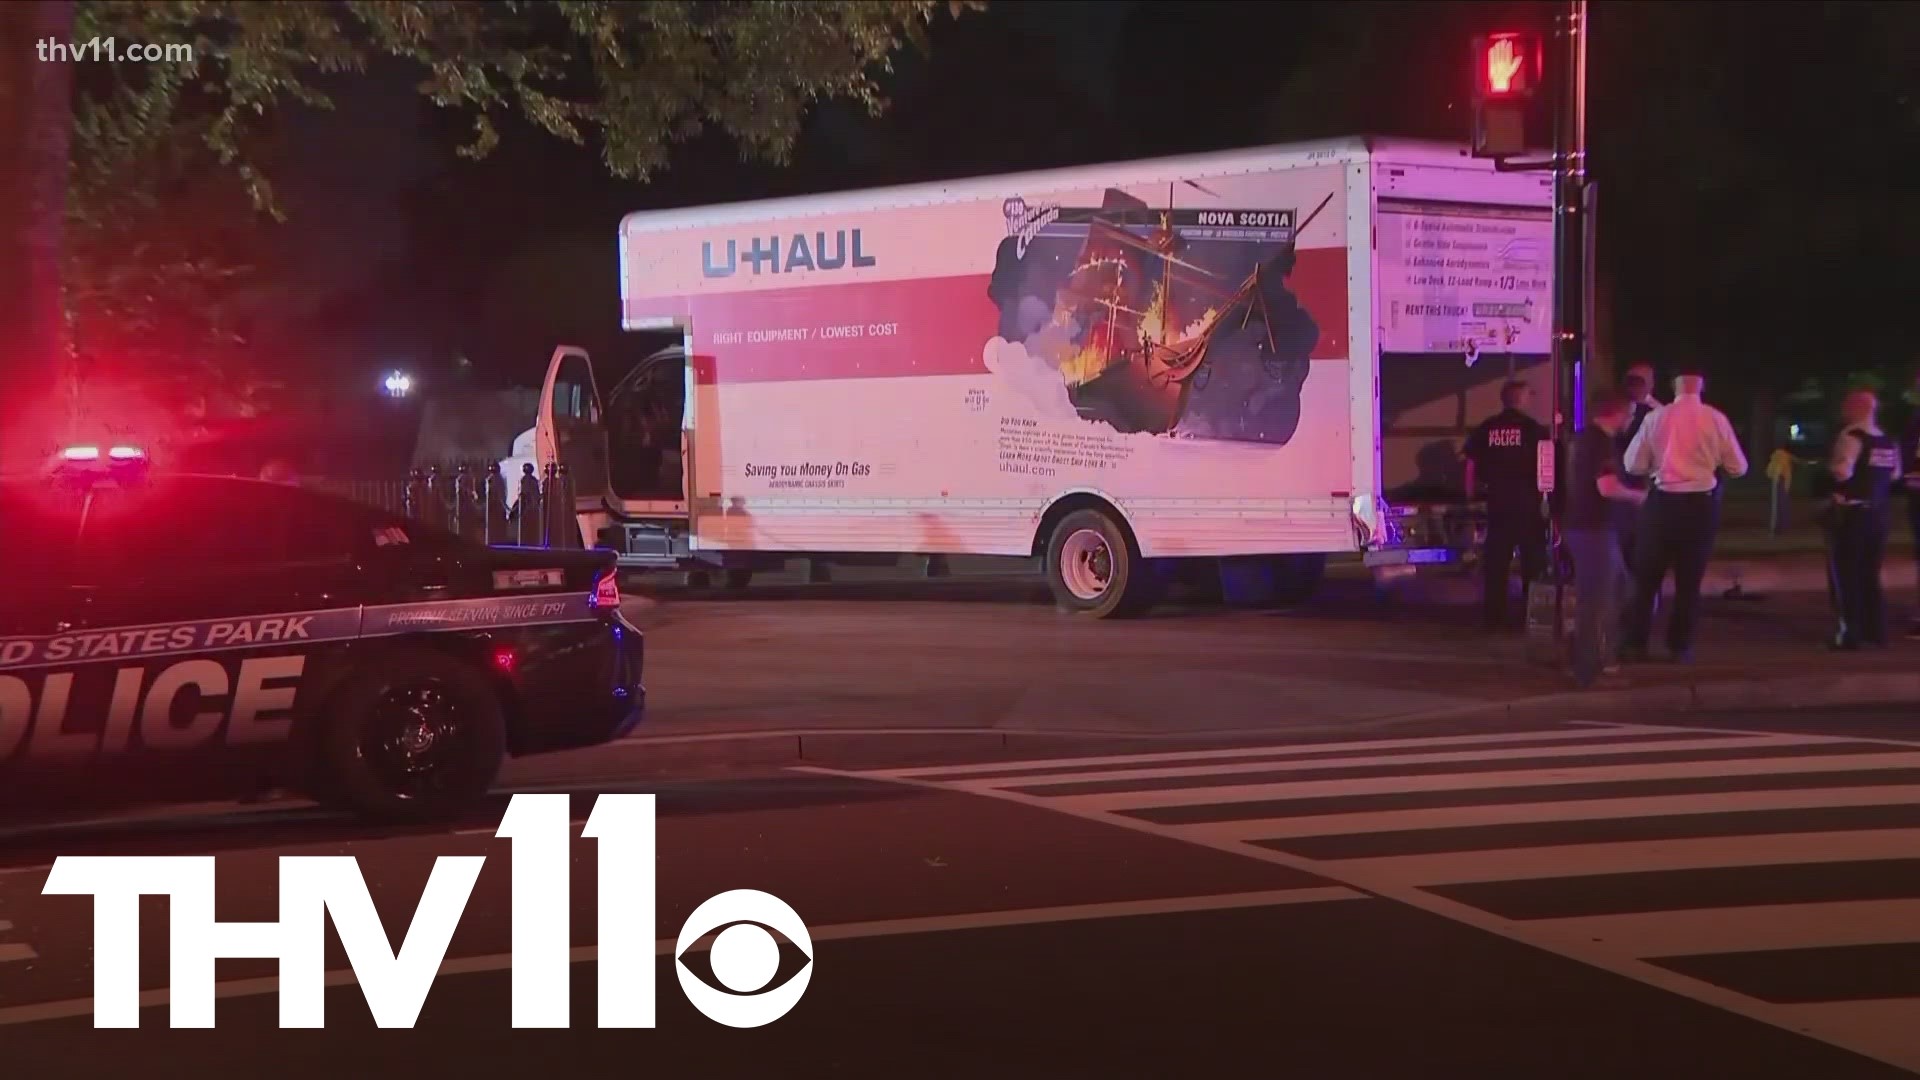 A driver is now facing multiple charges after slamming a U-haul truck into a security barrier near the White House in Washington, D.C.